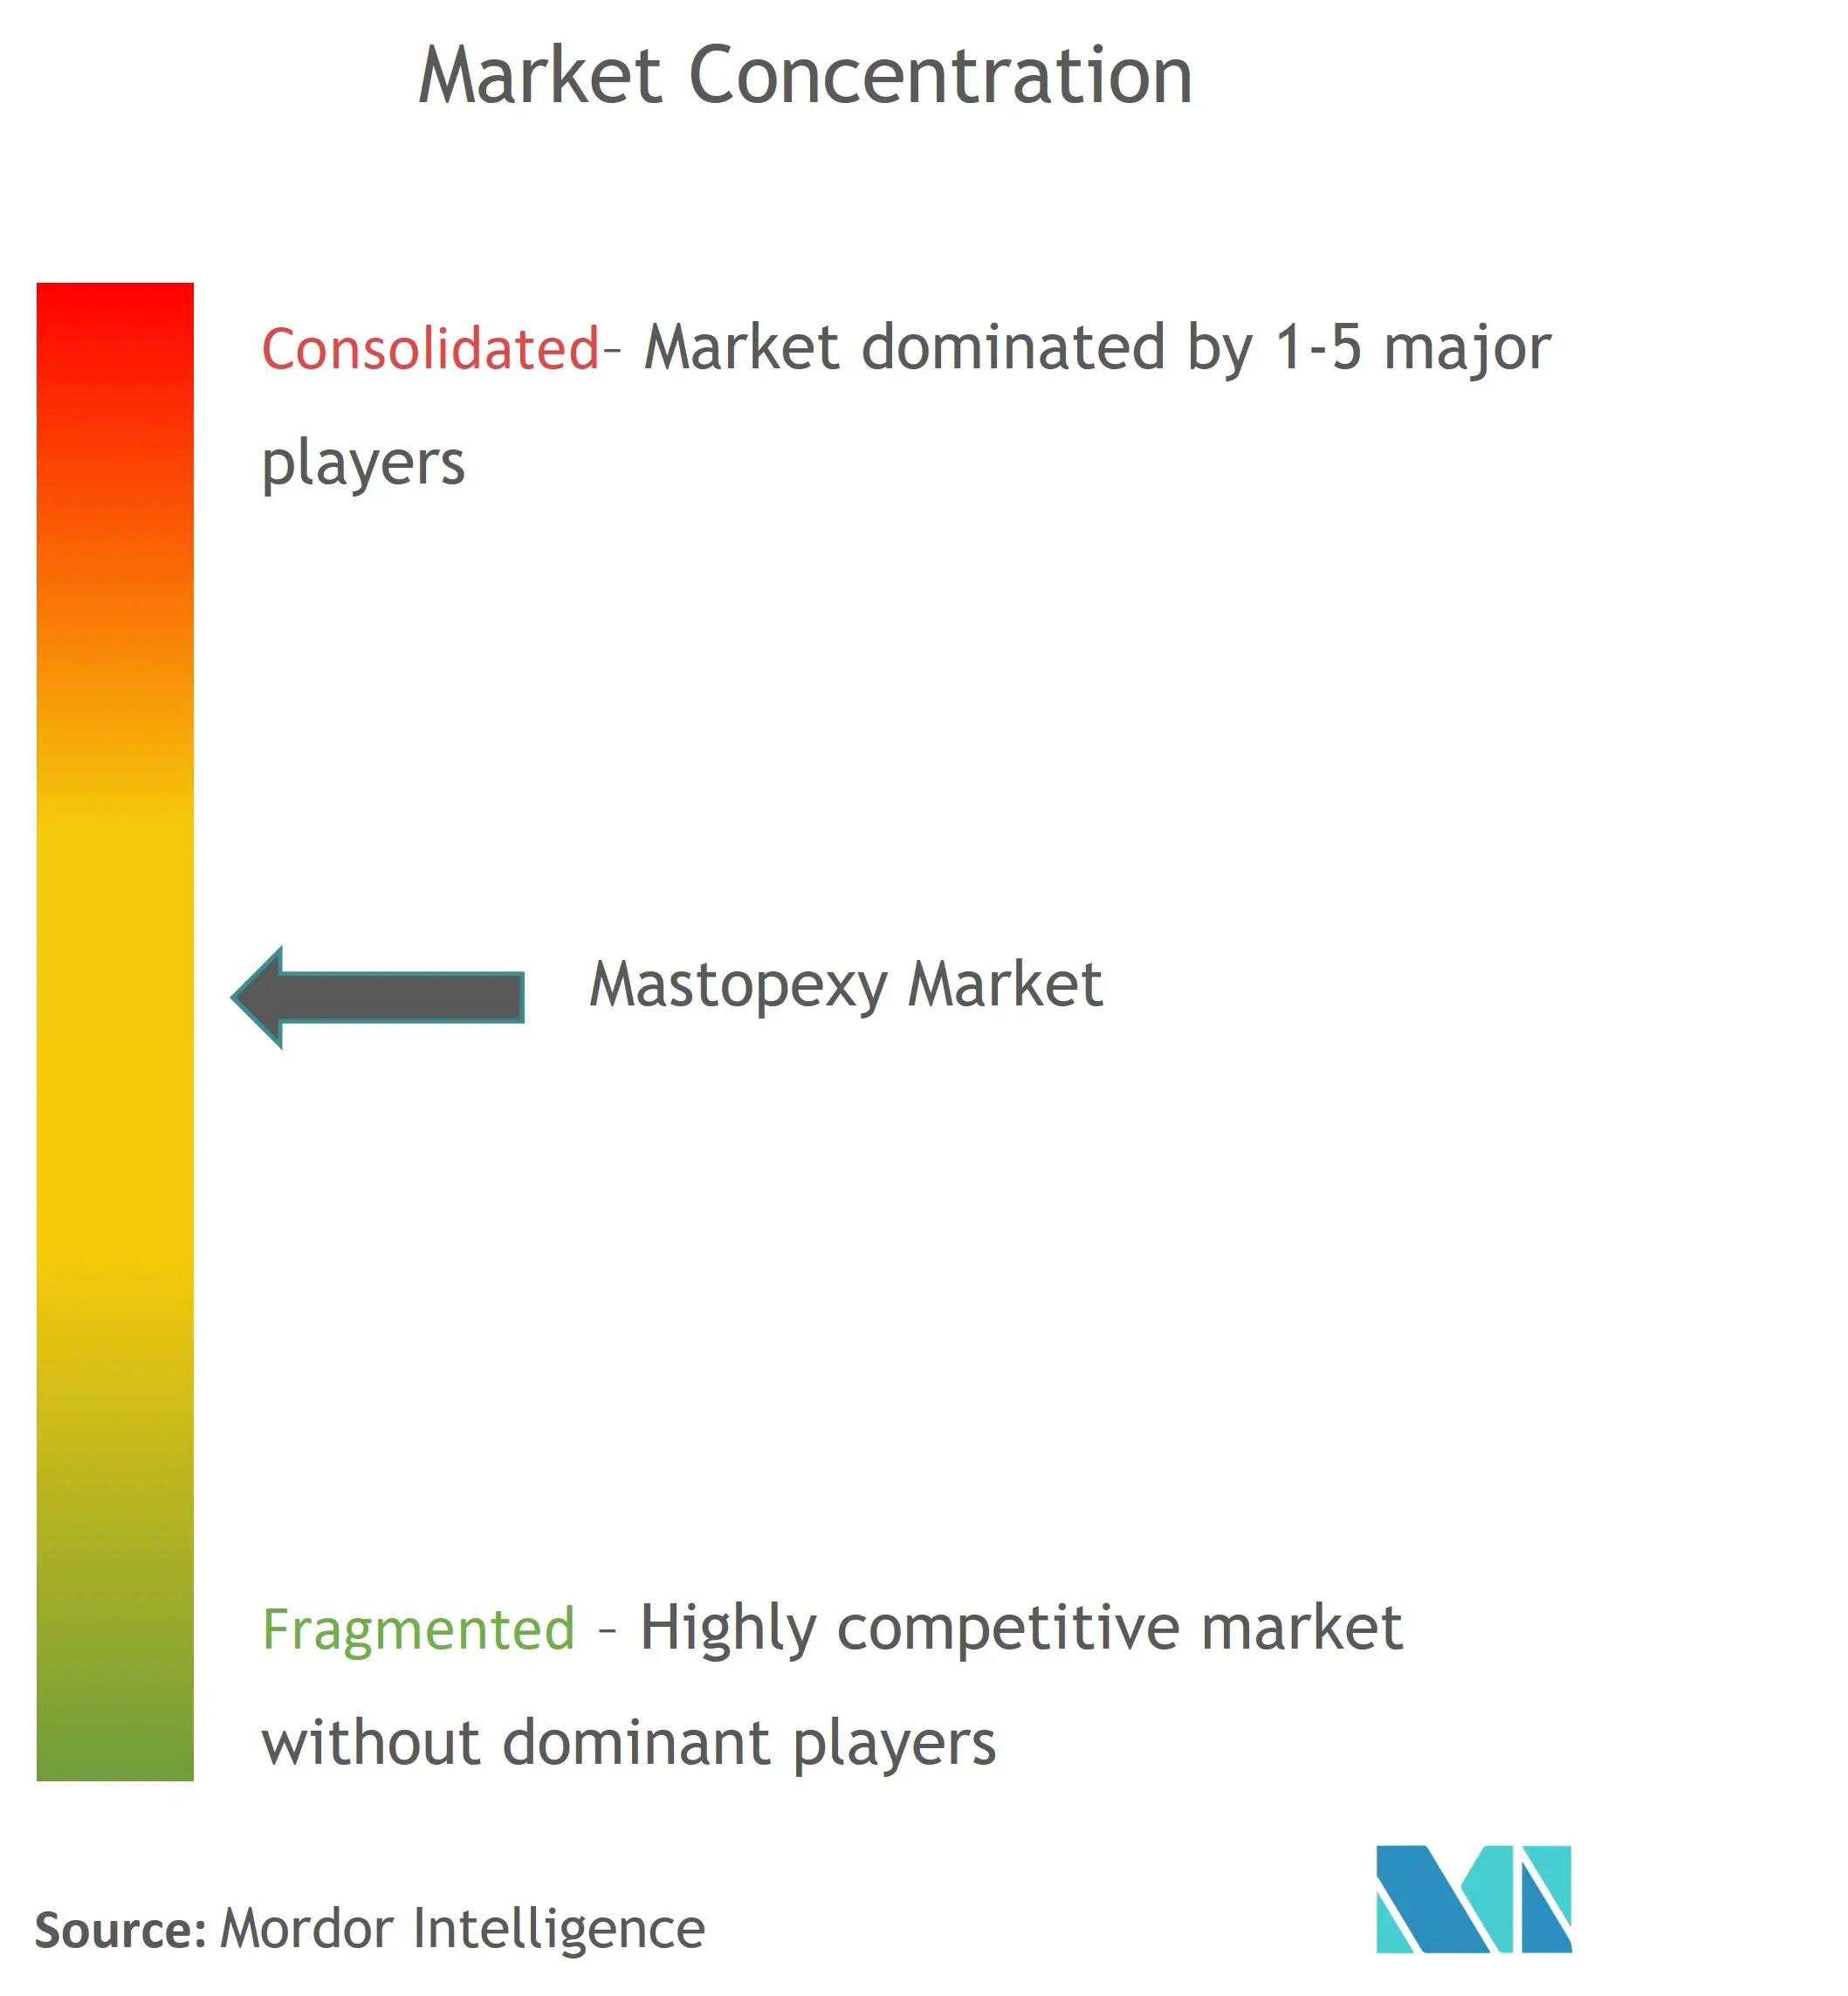 Global Mastopexy Market Concentration